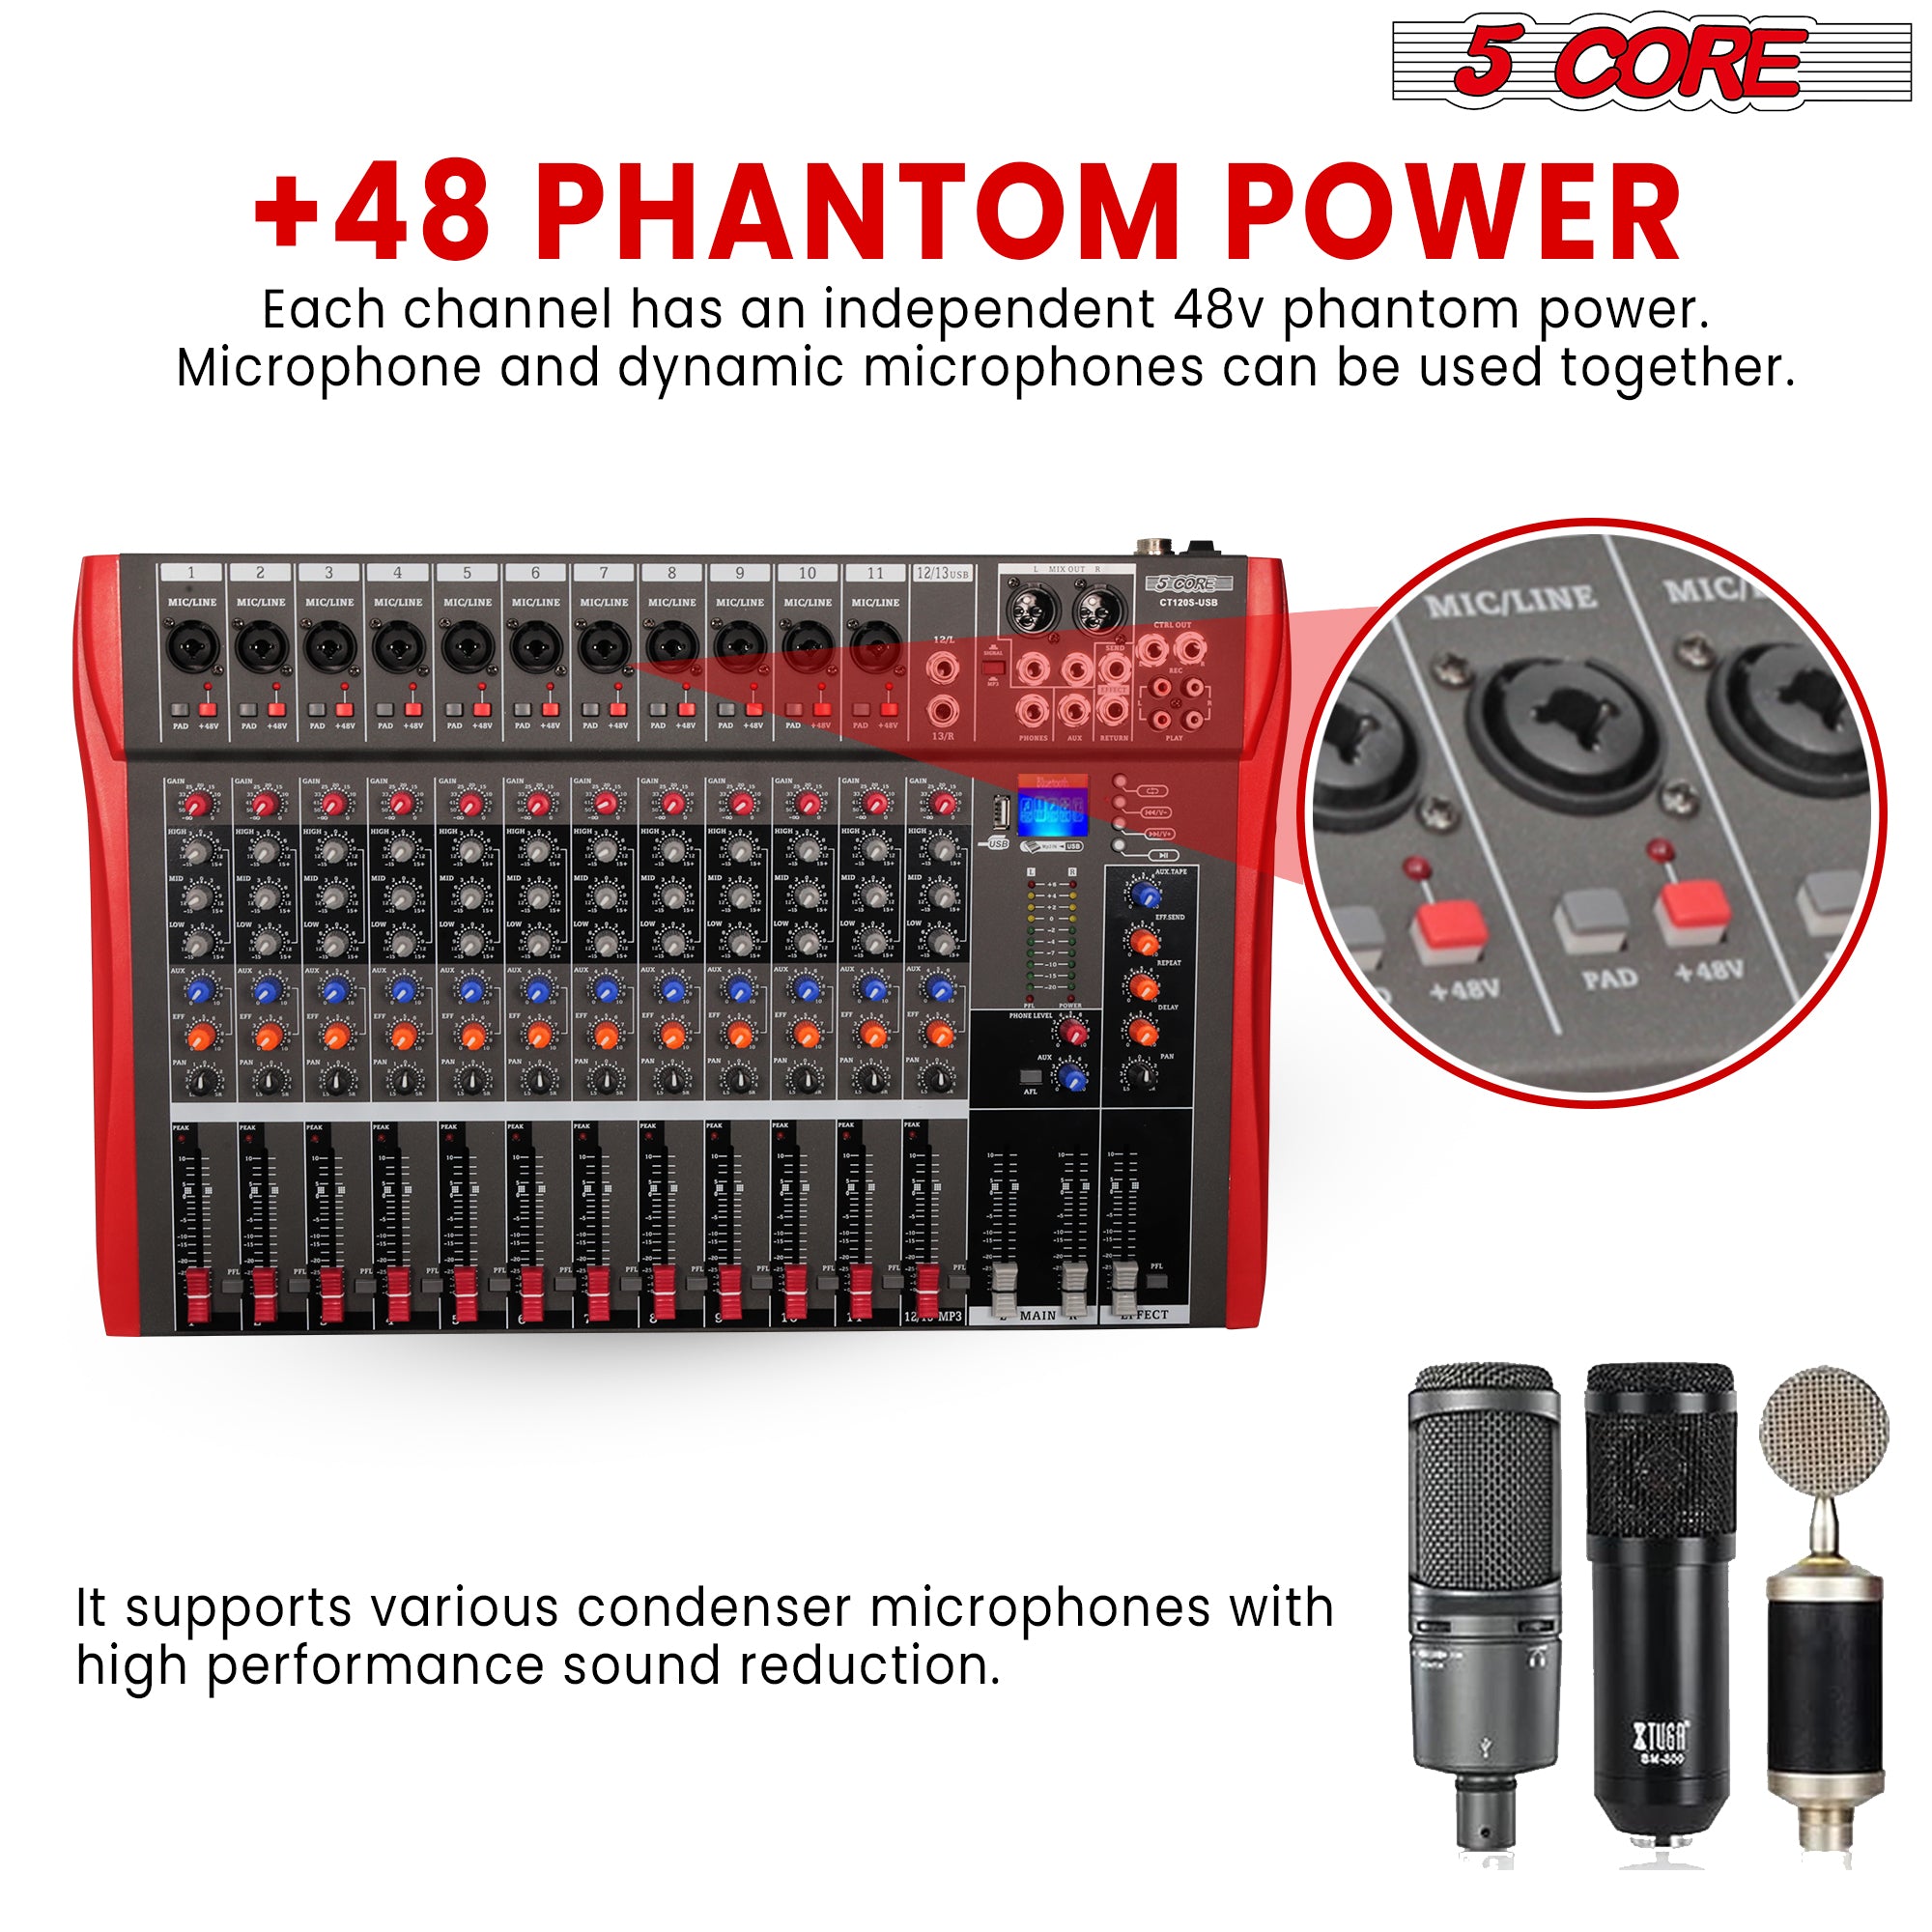 Audio mixer 12 channel has an independent +48v phantom power.